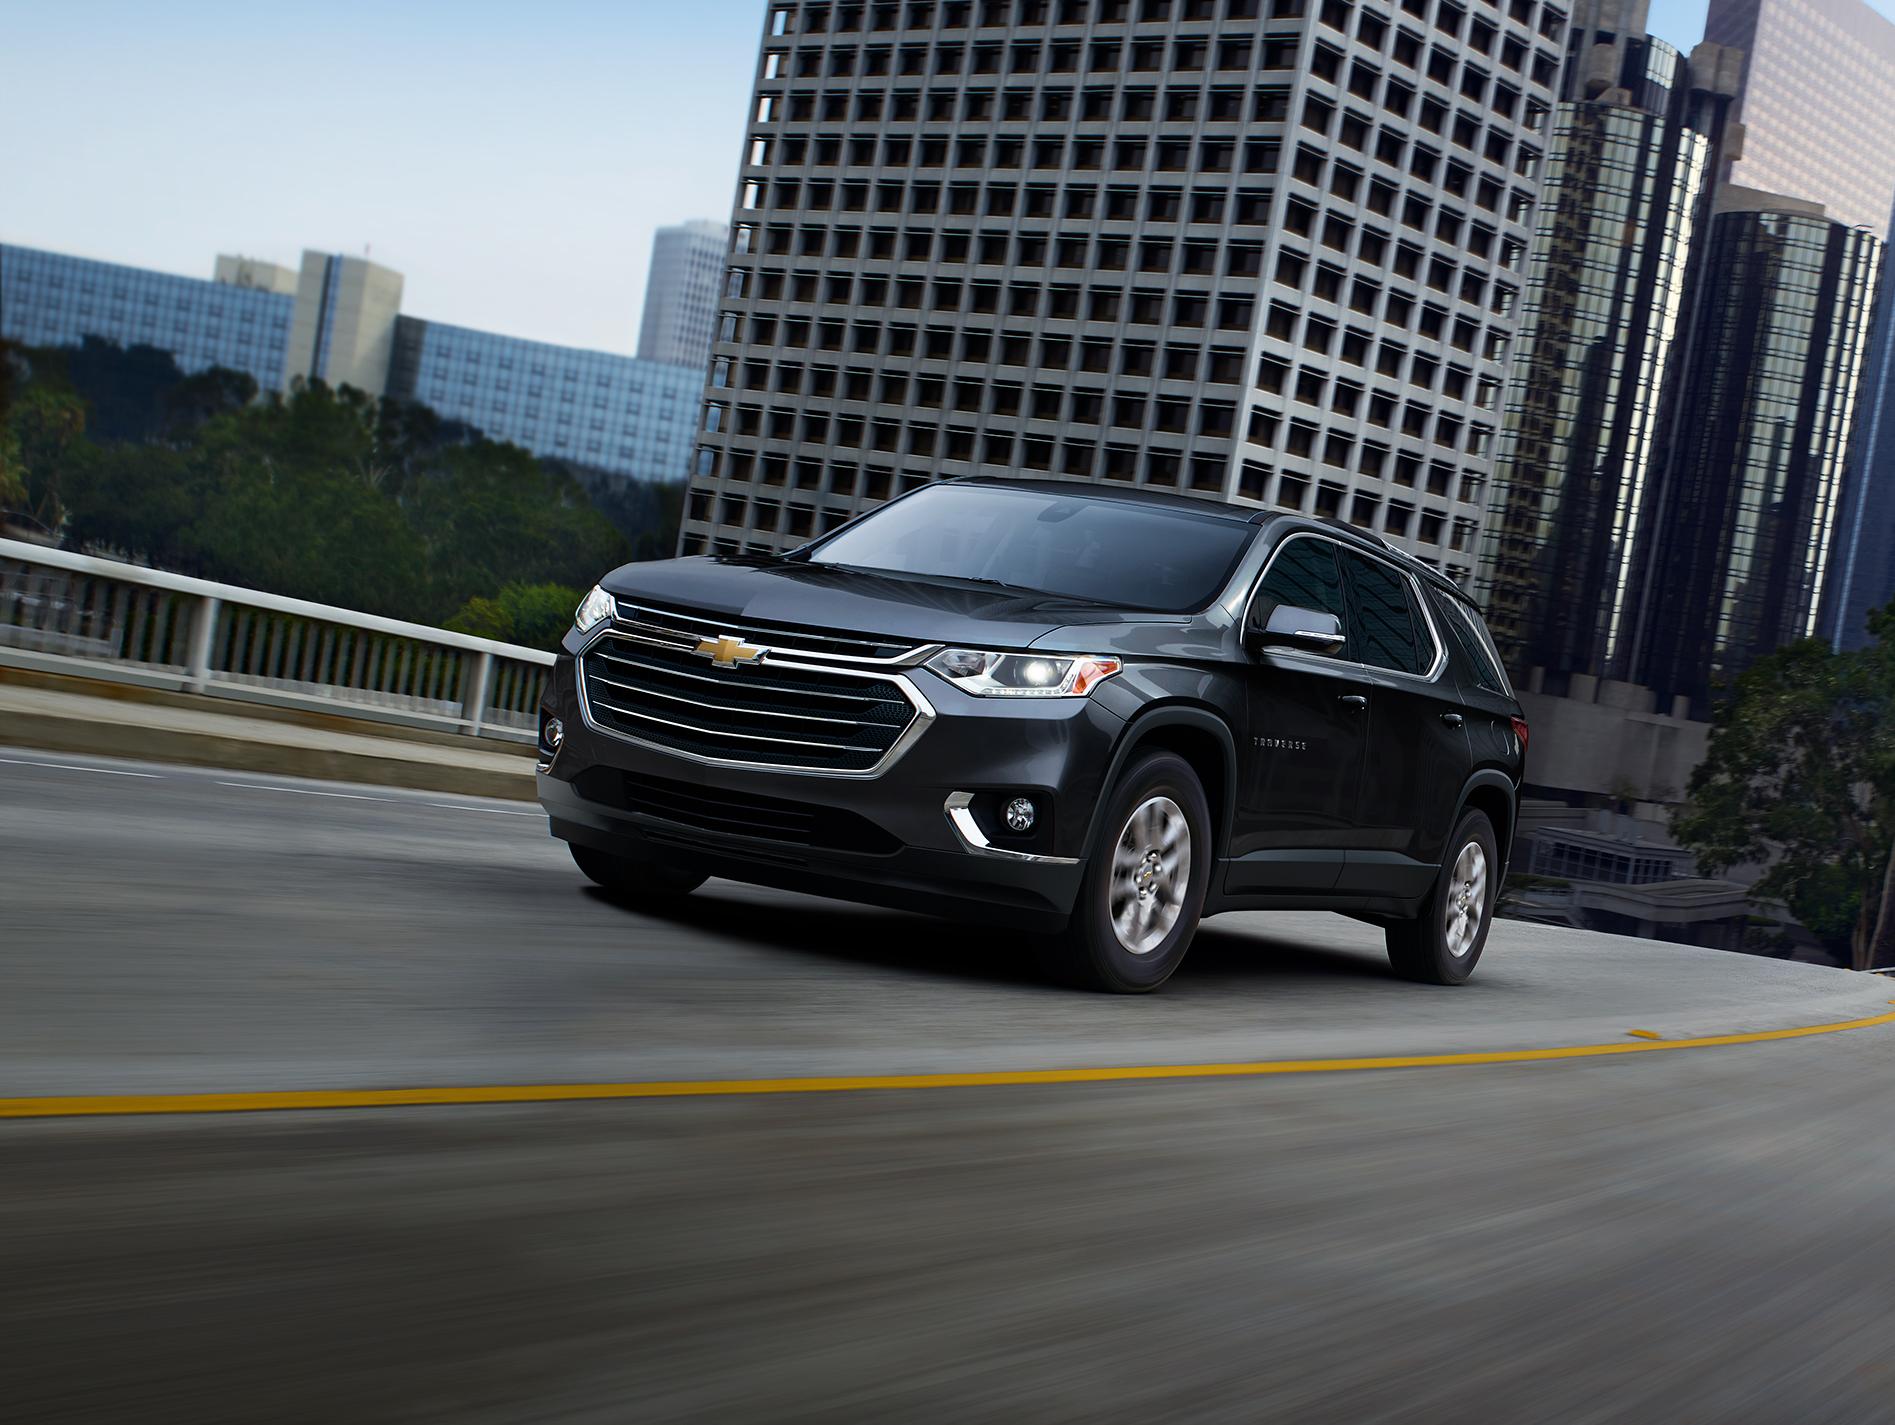 2018 Chevrolet Traverse LT | Lifestyle | Street with City Background